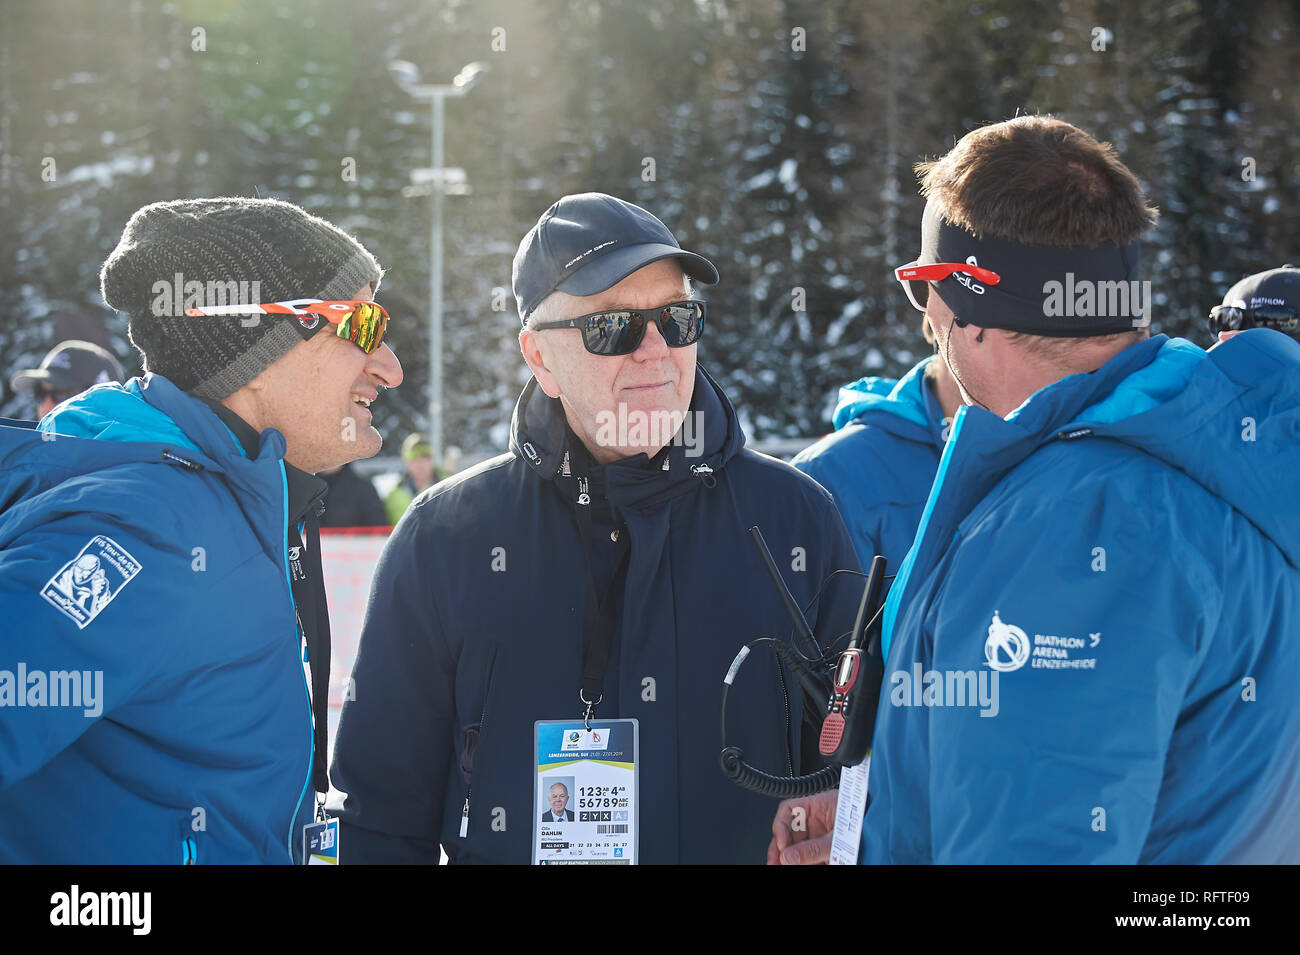 Page 23 - Biathlon Ibu High Resolution Stock Photography and Images - Alamy